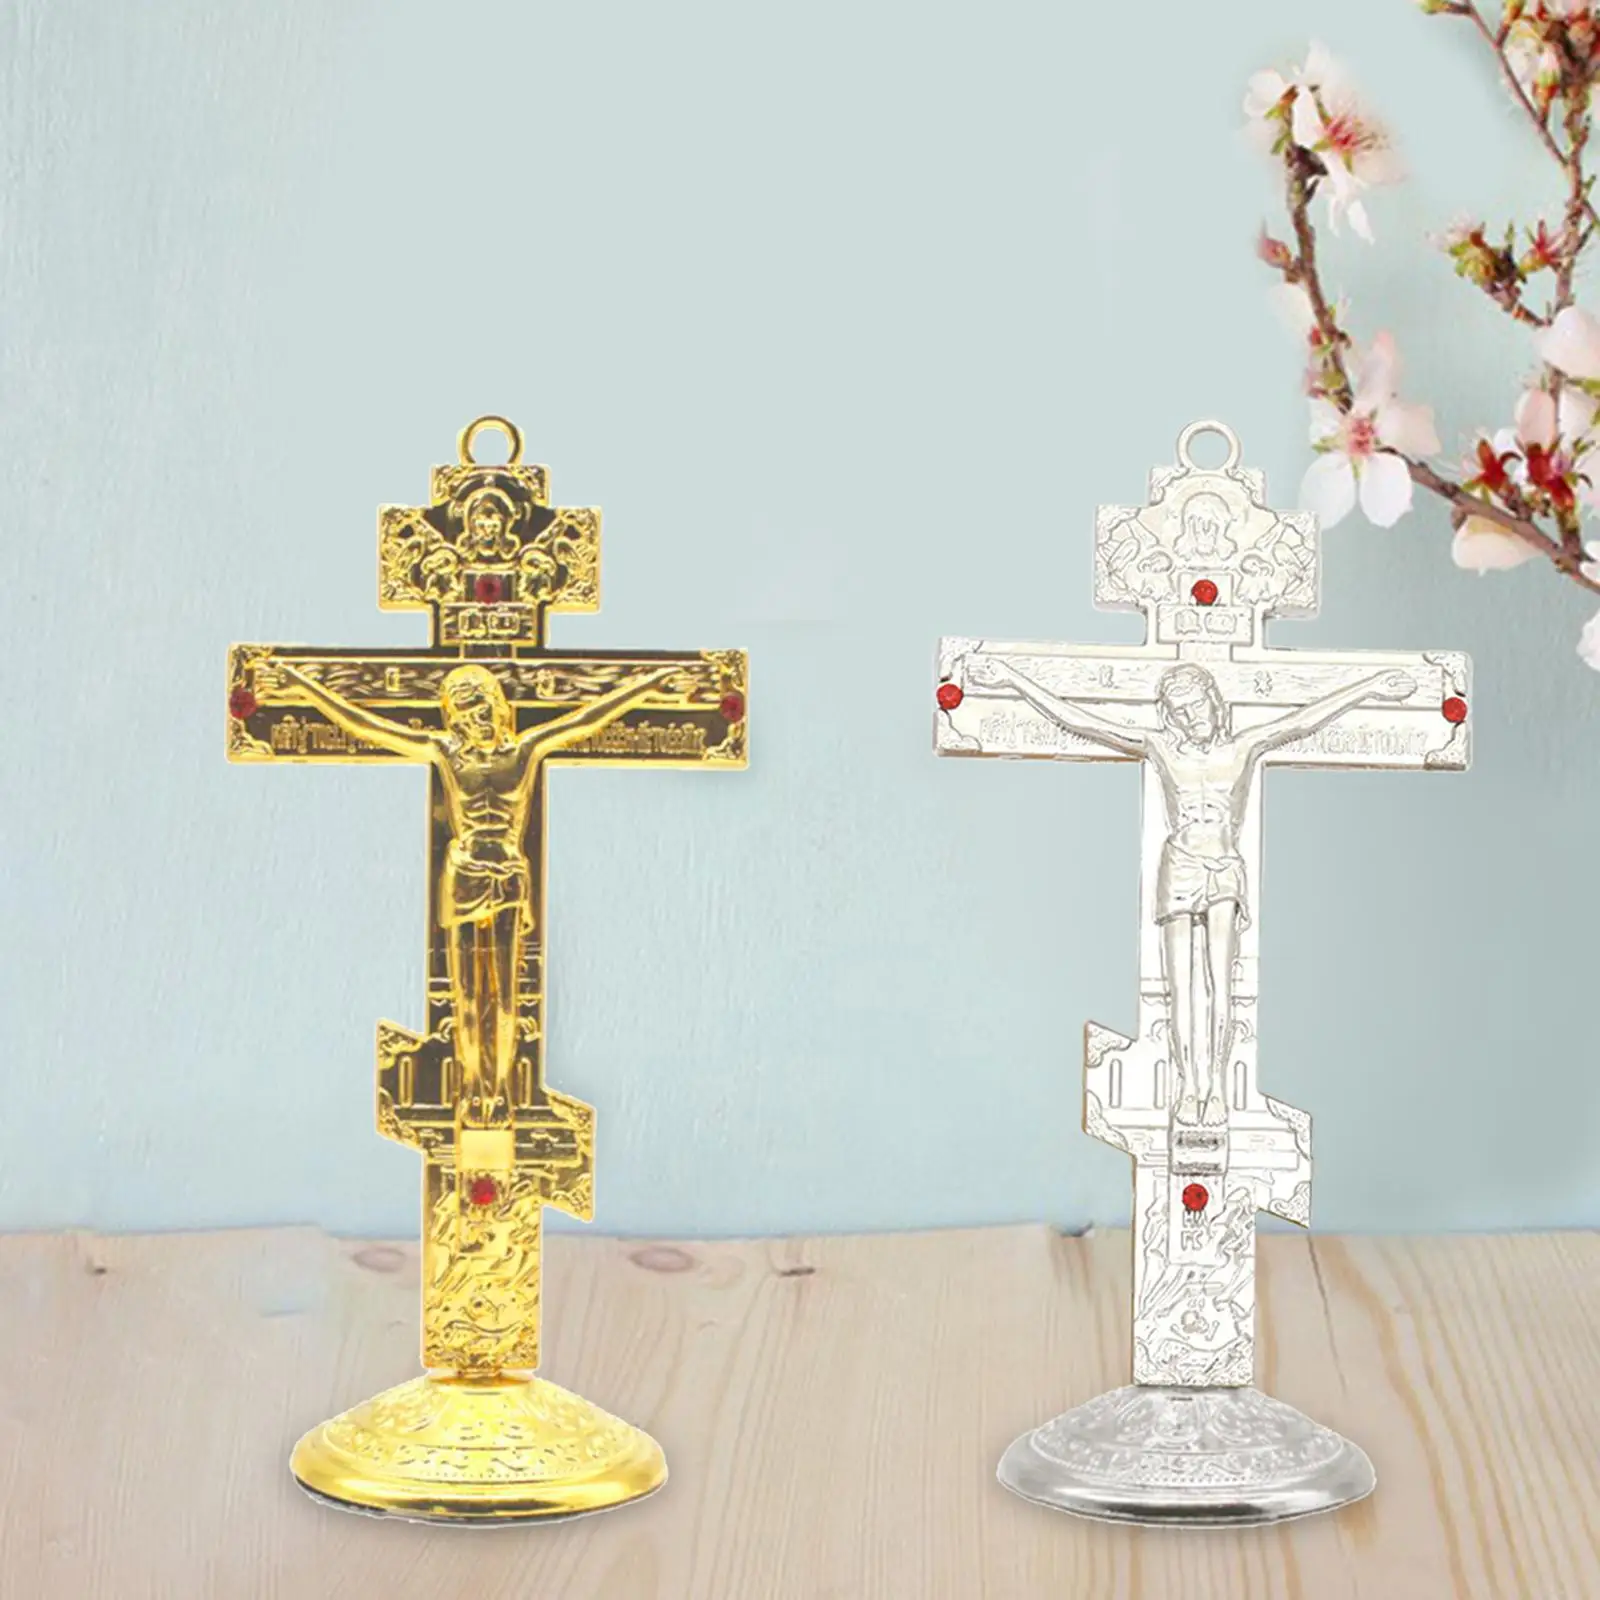 Jesus Cross for Desk 6.7x14cm Religious Gifts Easy Installation Standing Crucifix Home Chapel Decoration Durable Home Decor